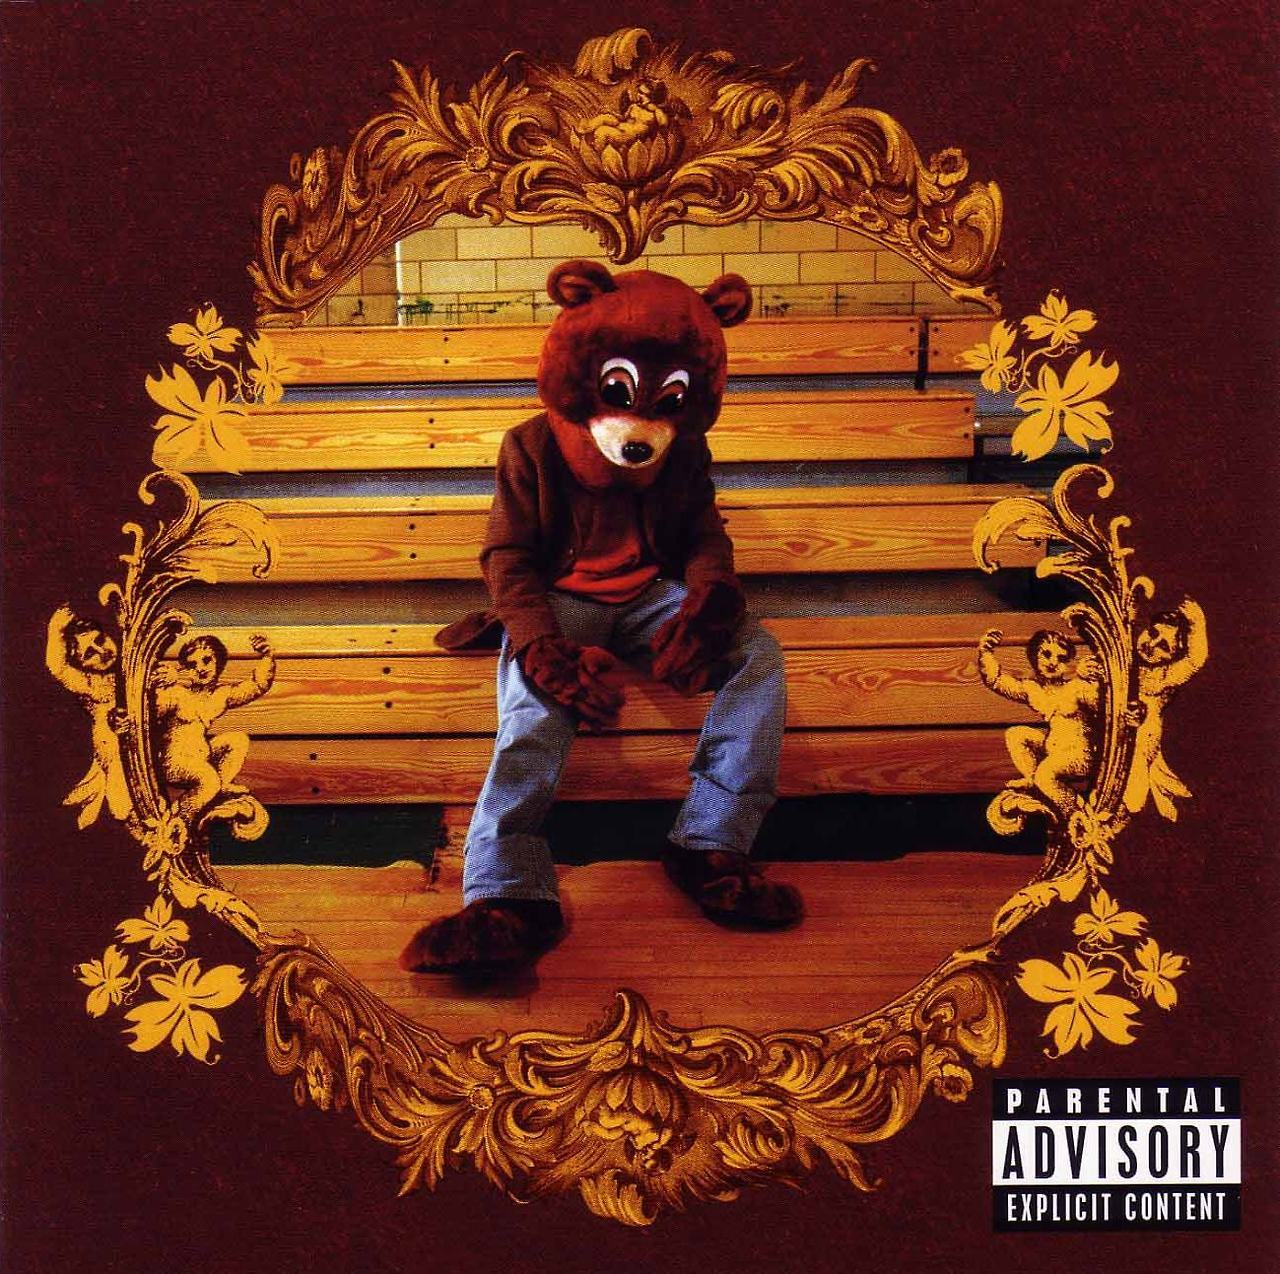 Eleven years ago today, Kanye West released his debut album, The College Dropout.